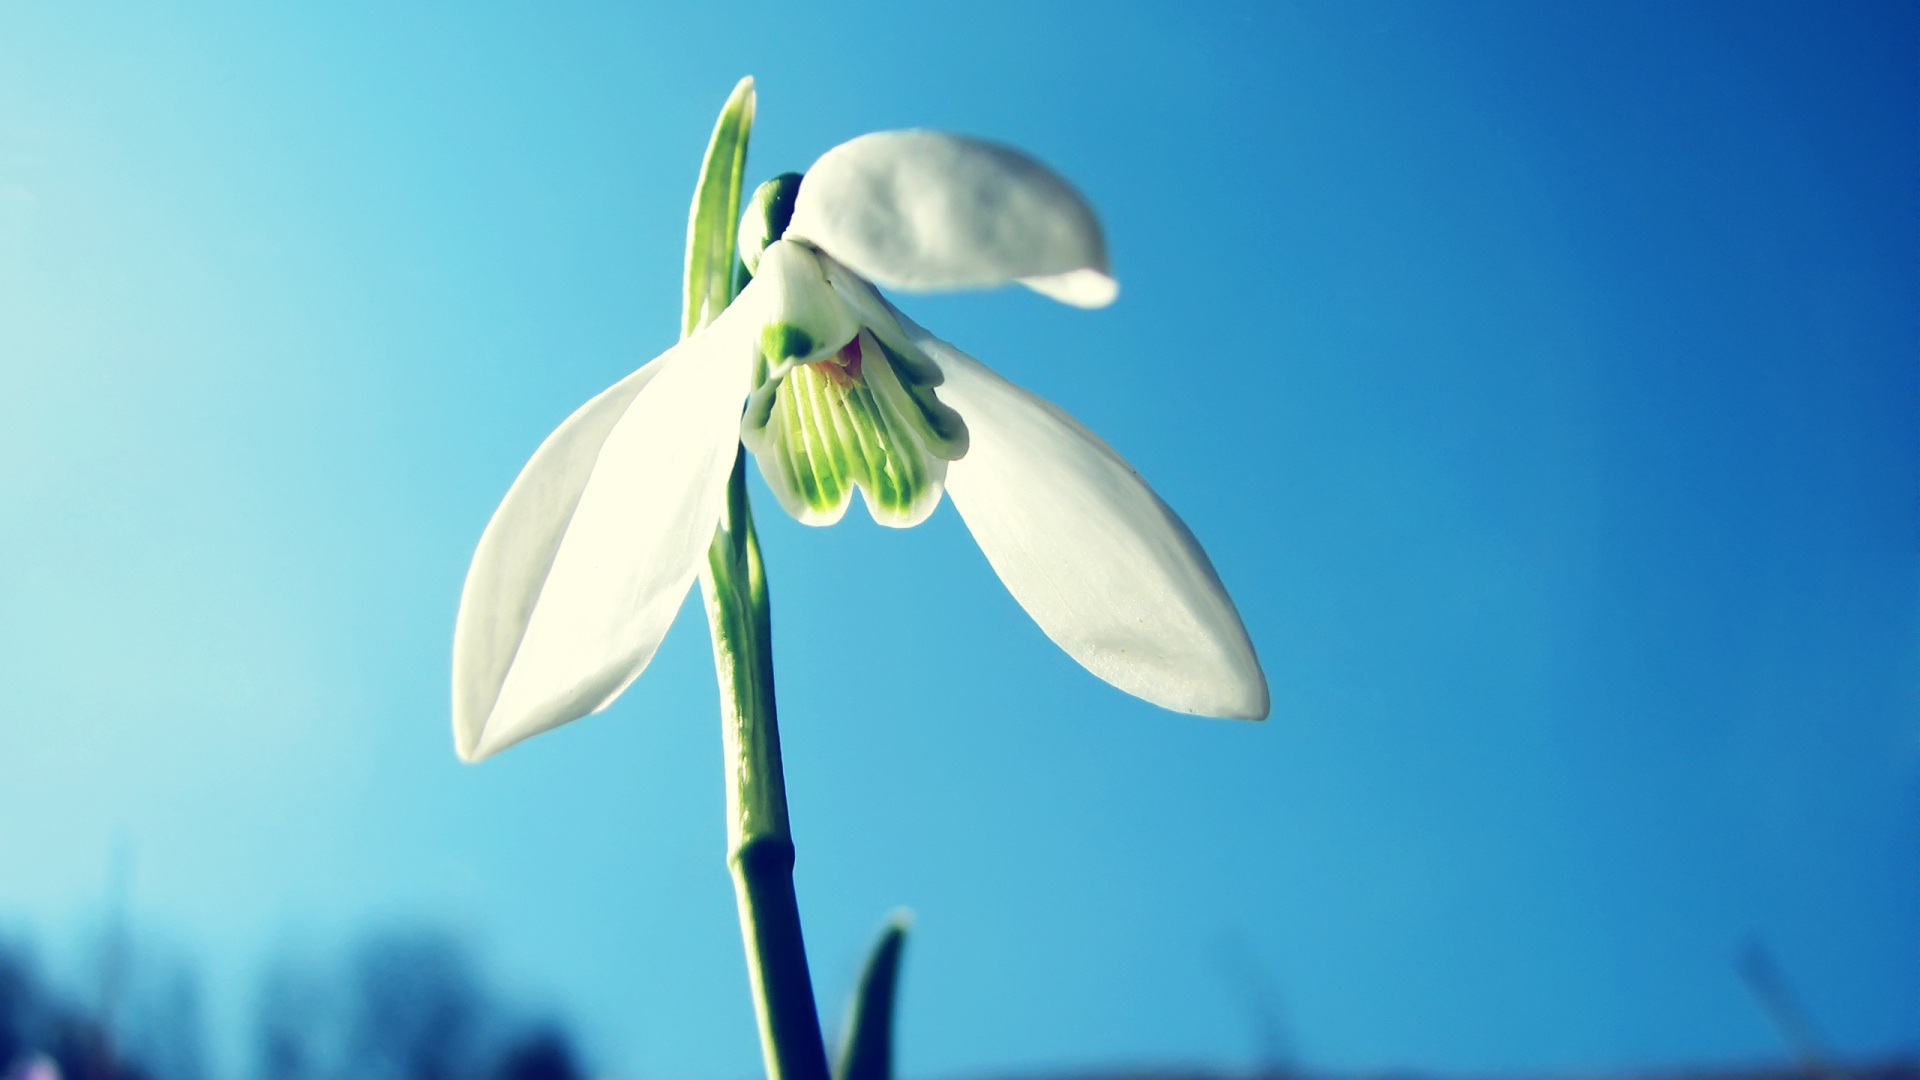 White snowdrop against the blue sky